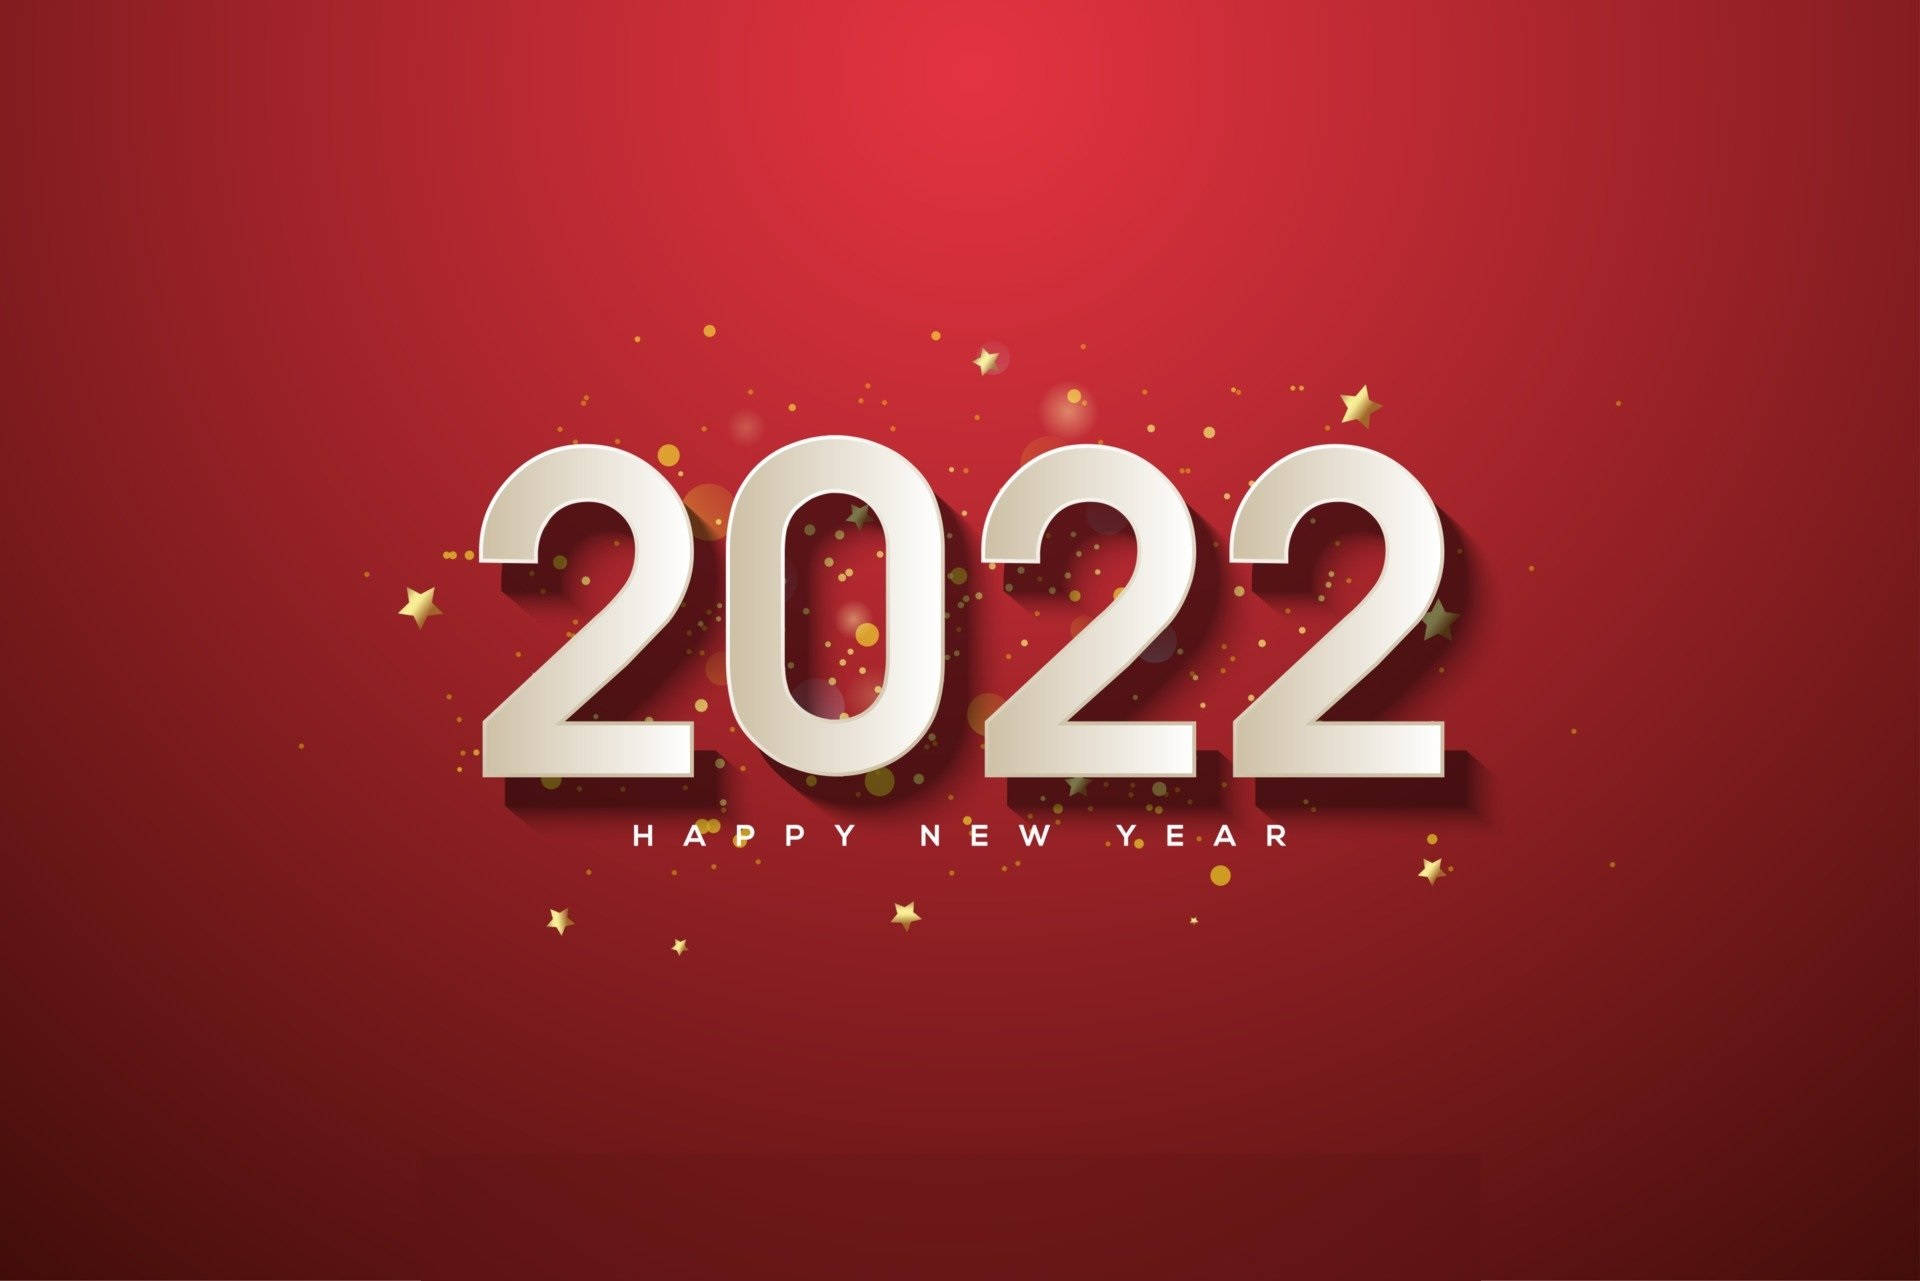 Happy New Year 2022 Red Art Background